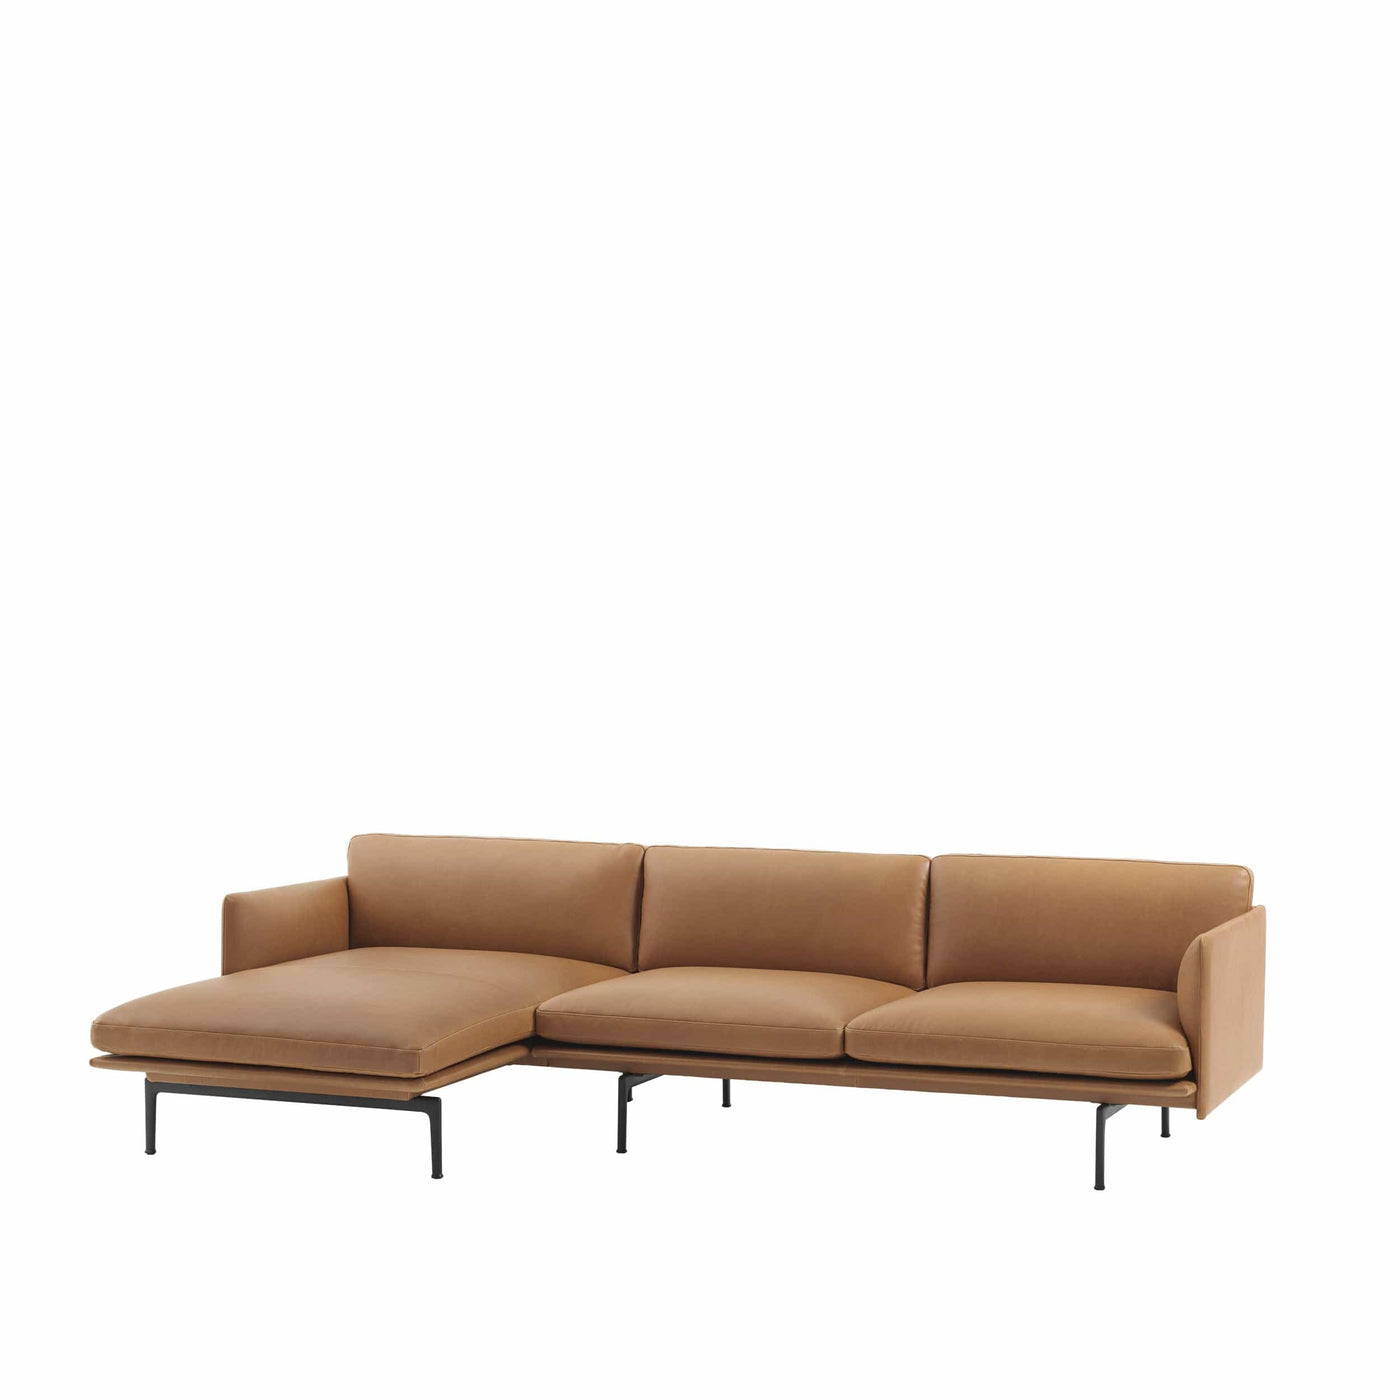 Muuto Outline Chaise Longue 3 Seater in cognac refine leather.Made to order from someday designs